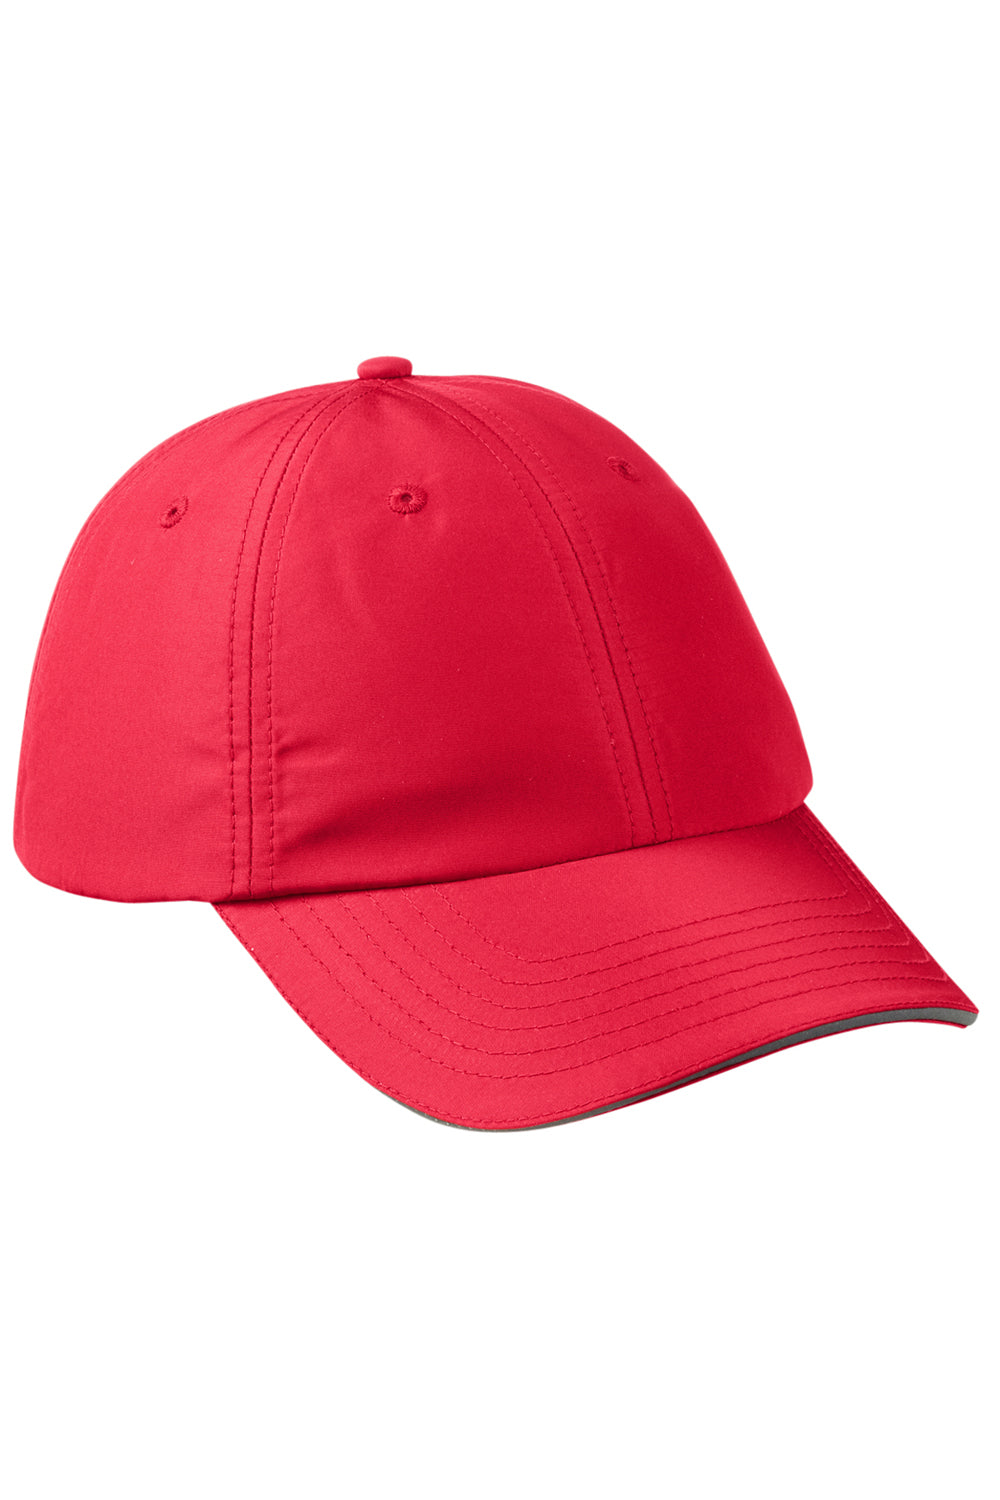 Core 365 CE001 Mens Pitch Performance Moisture Wicking Adjustable Hat Red Front